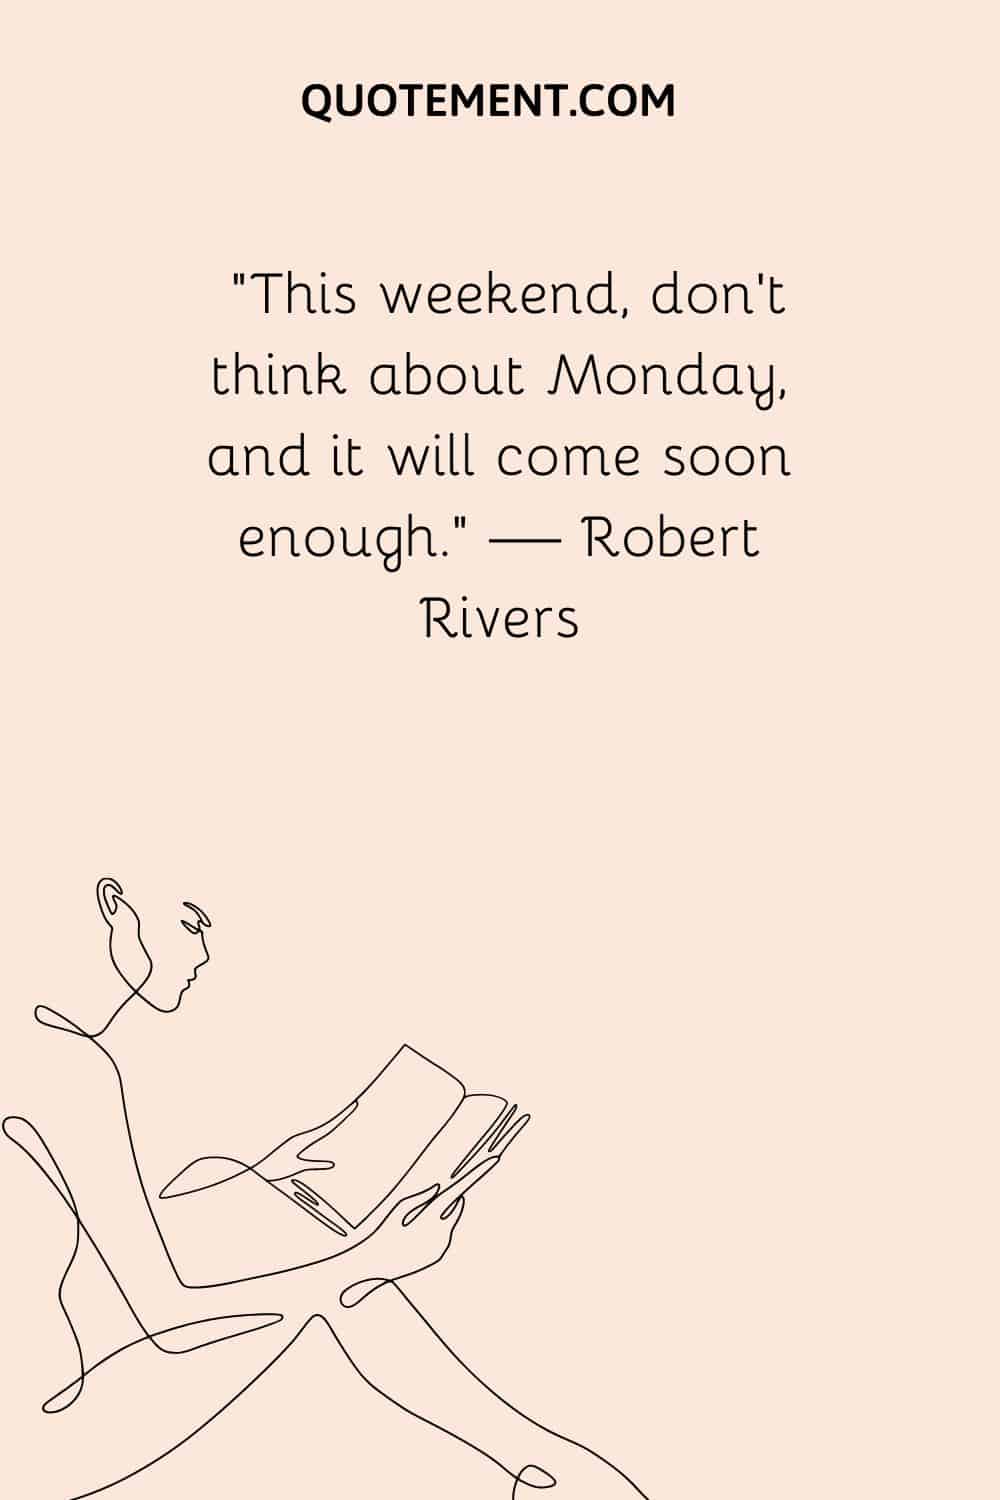 “This weekend, don’t think about Monday, and it will come soon enough.” — Robert Rivers